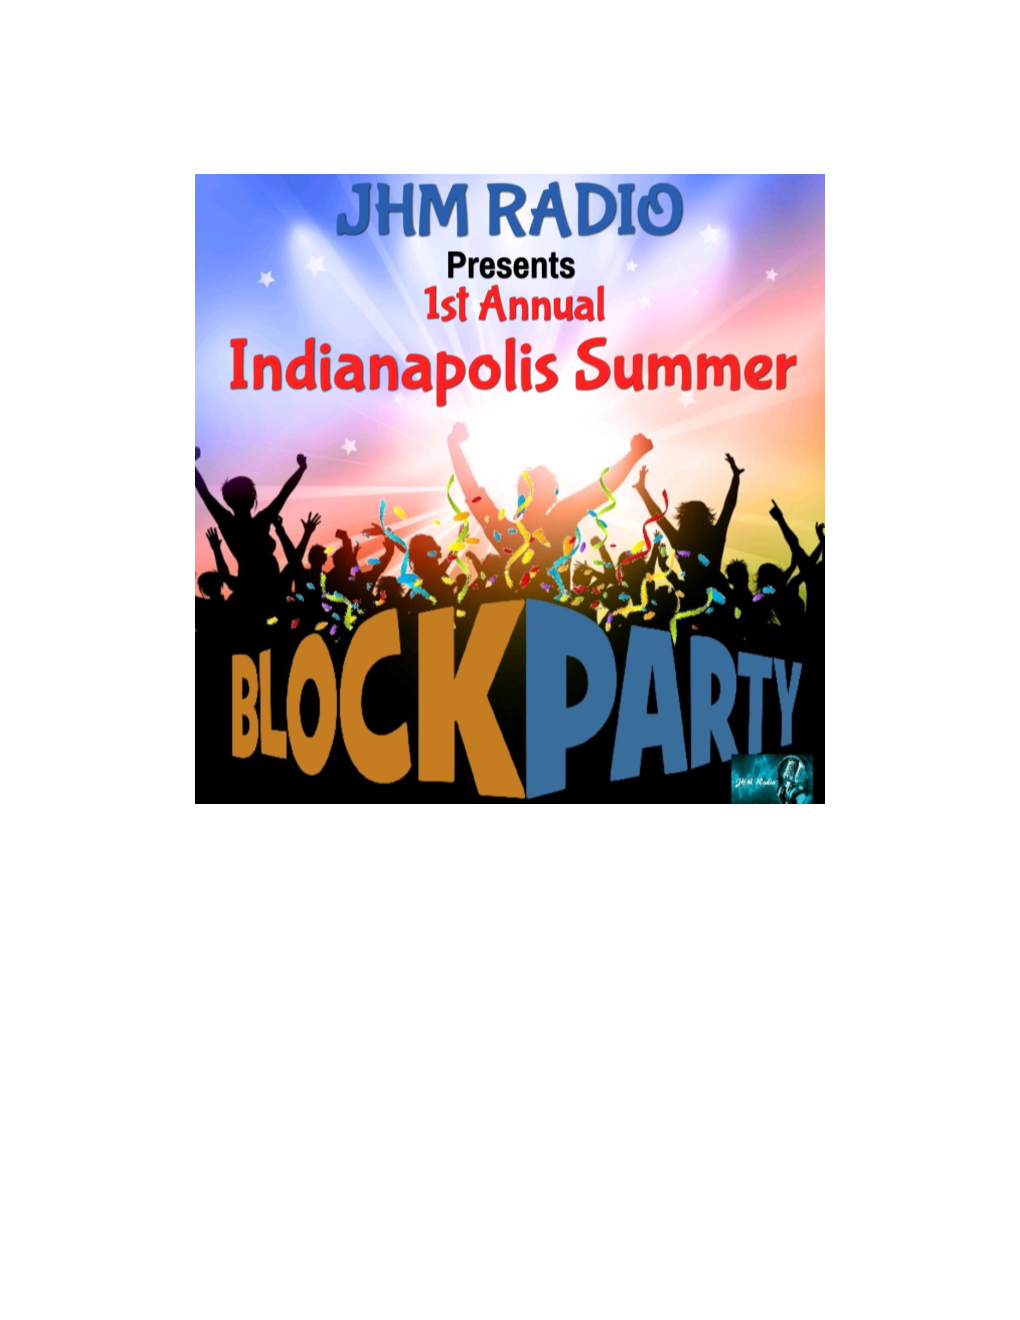 Name of the Event : INDIANAPOLIS SUMMER BLOCK PARTY